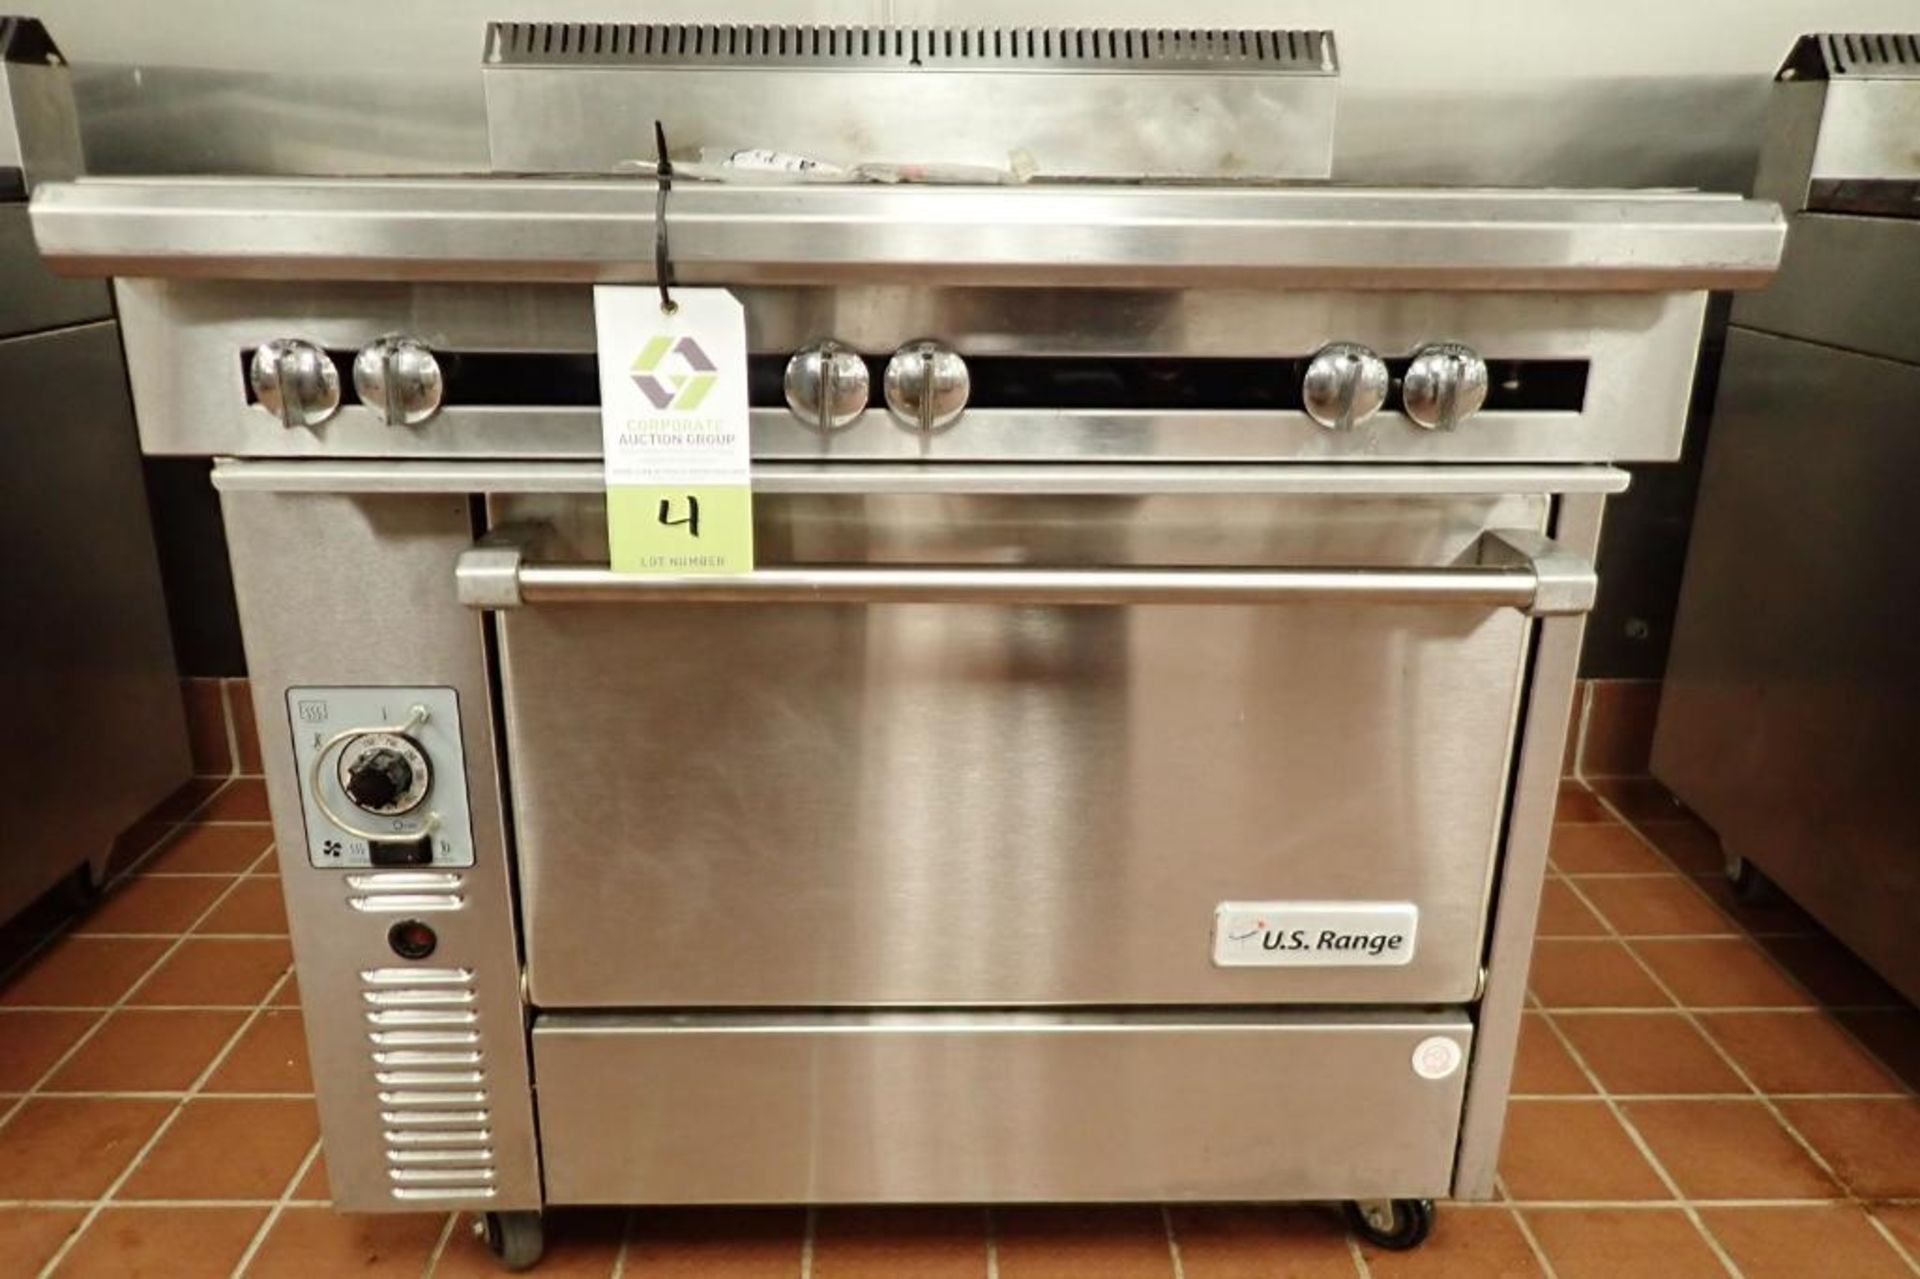 US Range six burner standard oven, Model C836-6, natural gas, 36 in. wide x 39 in. deep x 41 in. tal - Image 3 of 5